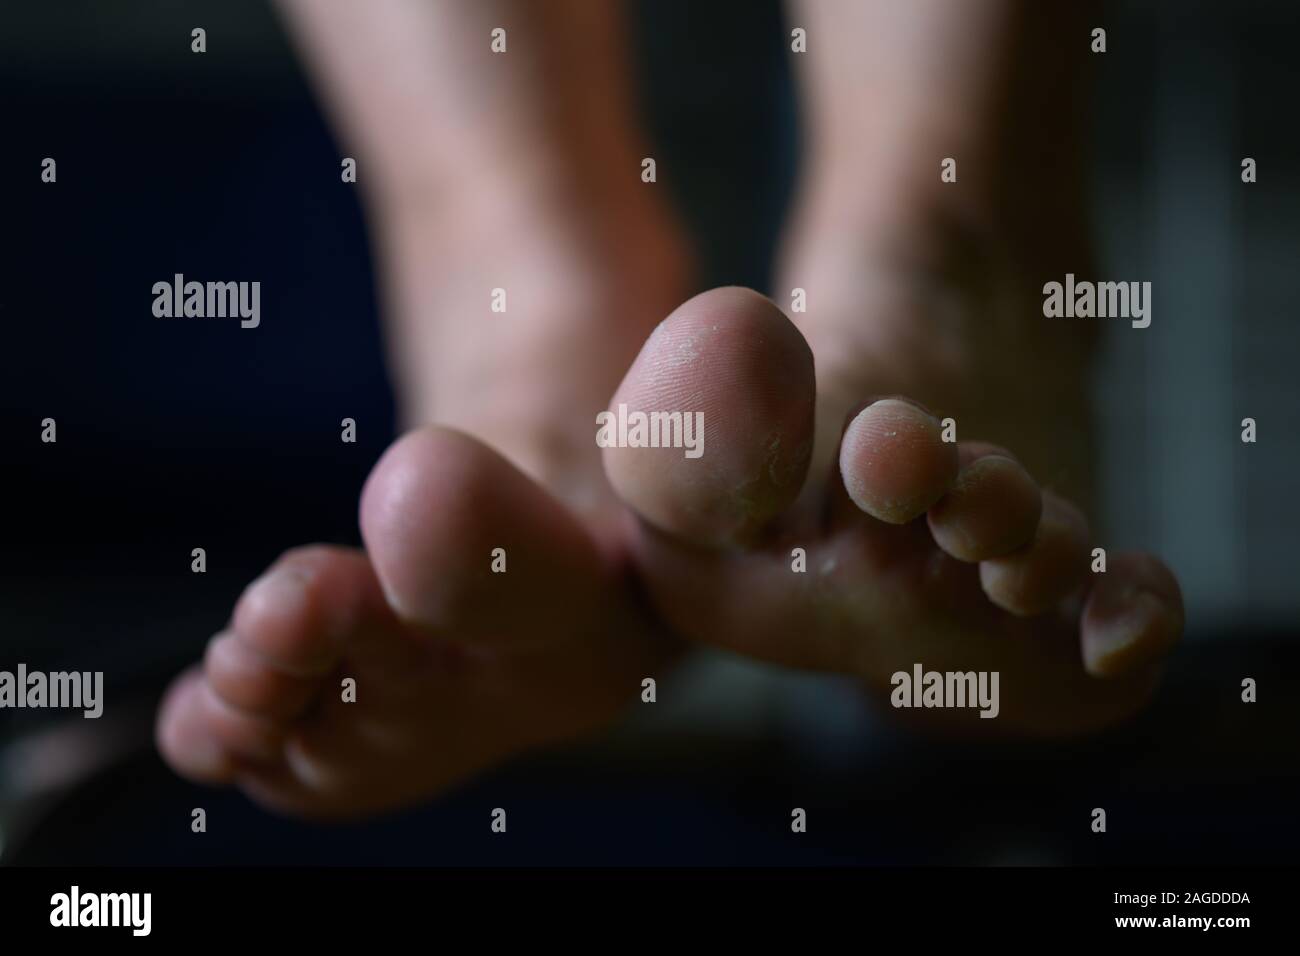 Close up of woman feet having tinea pedis althlete's fungus infection. Pathogenic infectious disease that can be easily acquired from contaminated flo Stock Photo